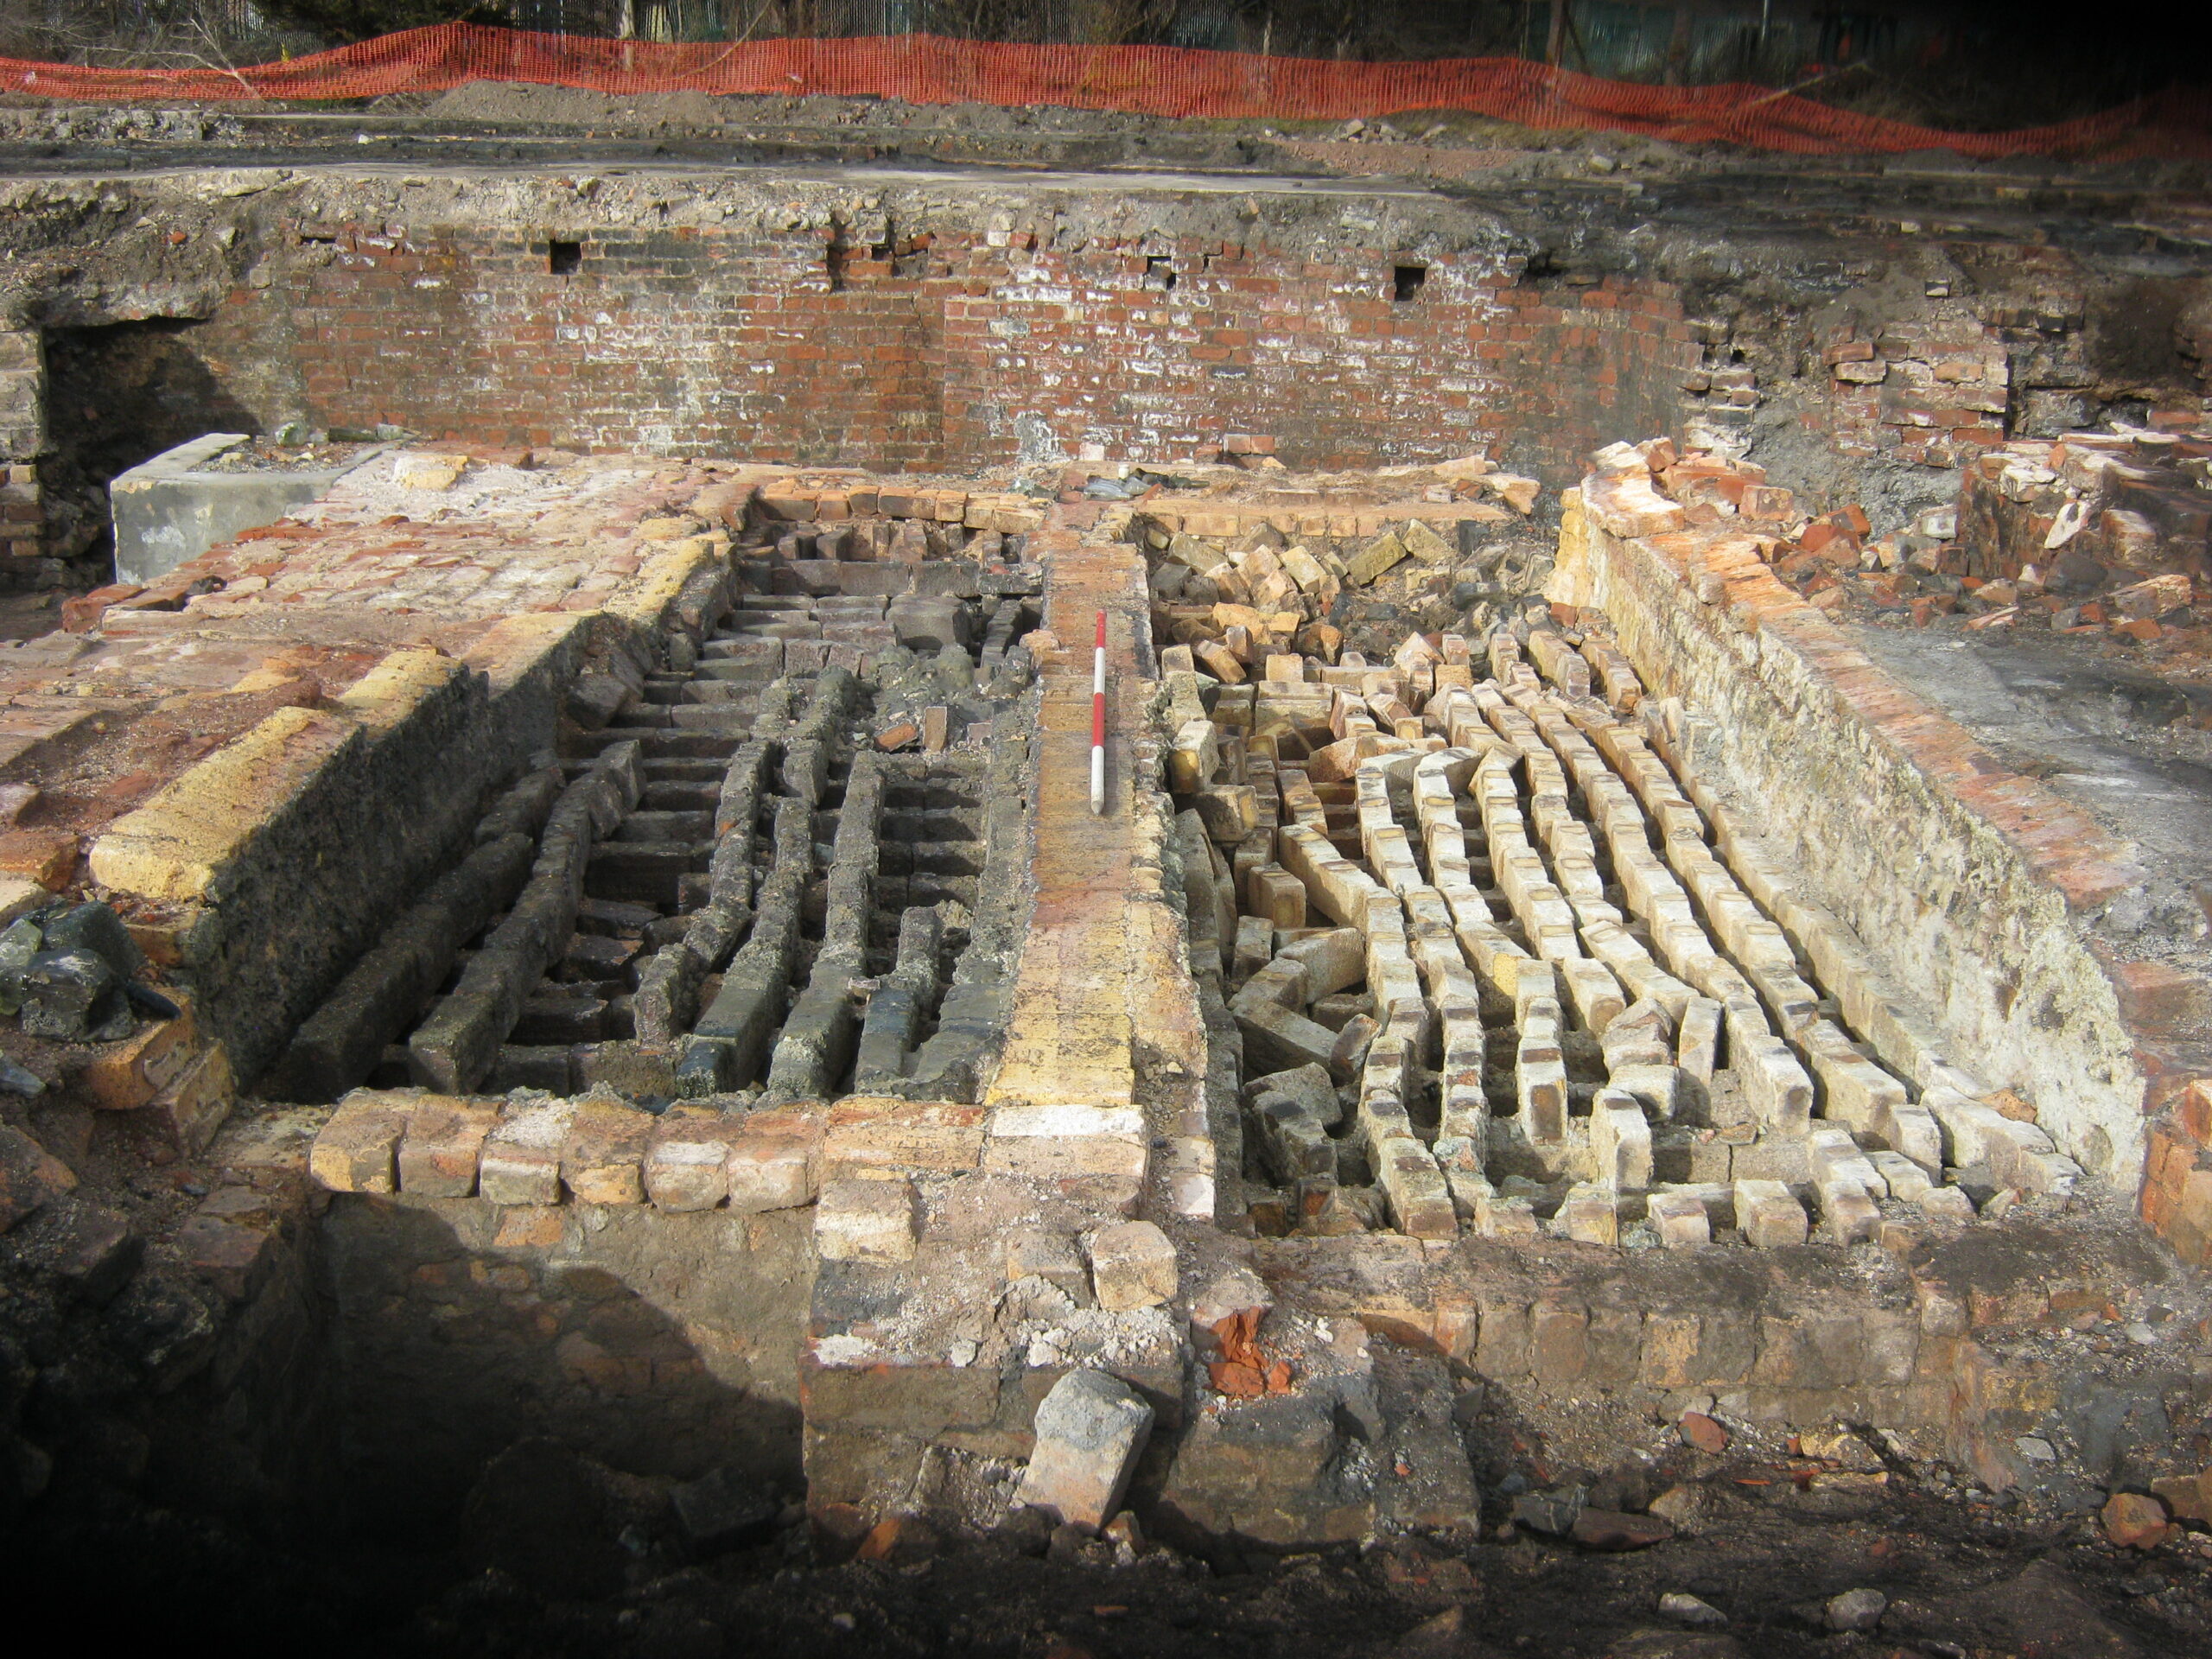 Bricks and Bottles: Industrial Archaeology at Baileyfield, Portobello